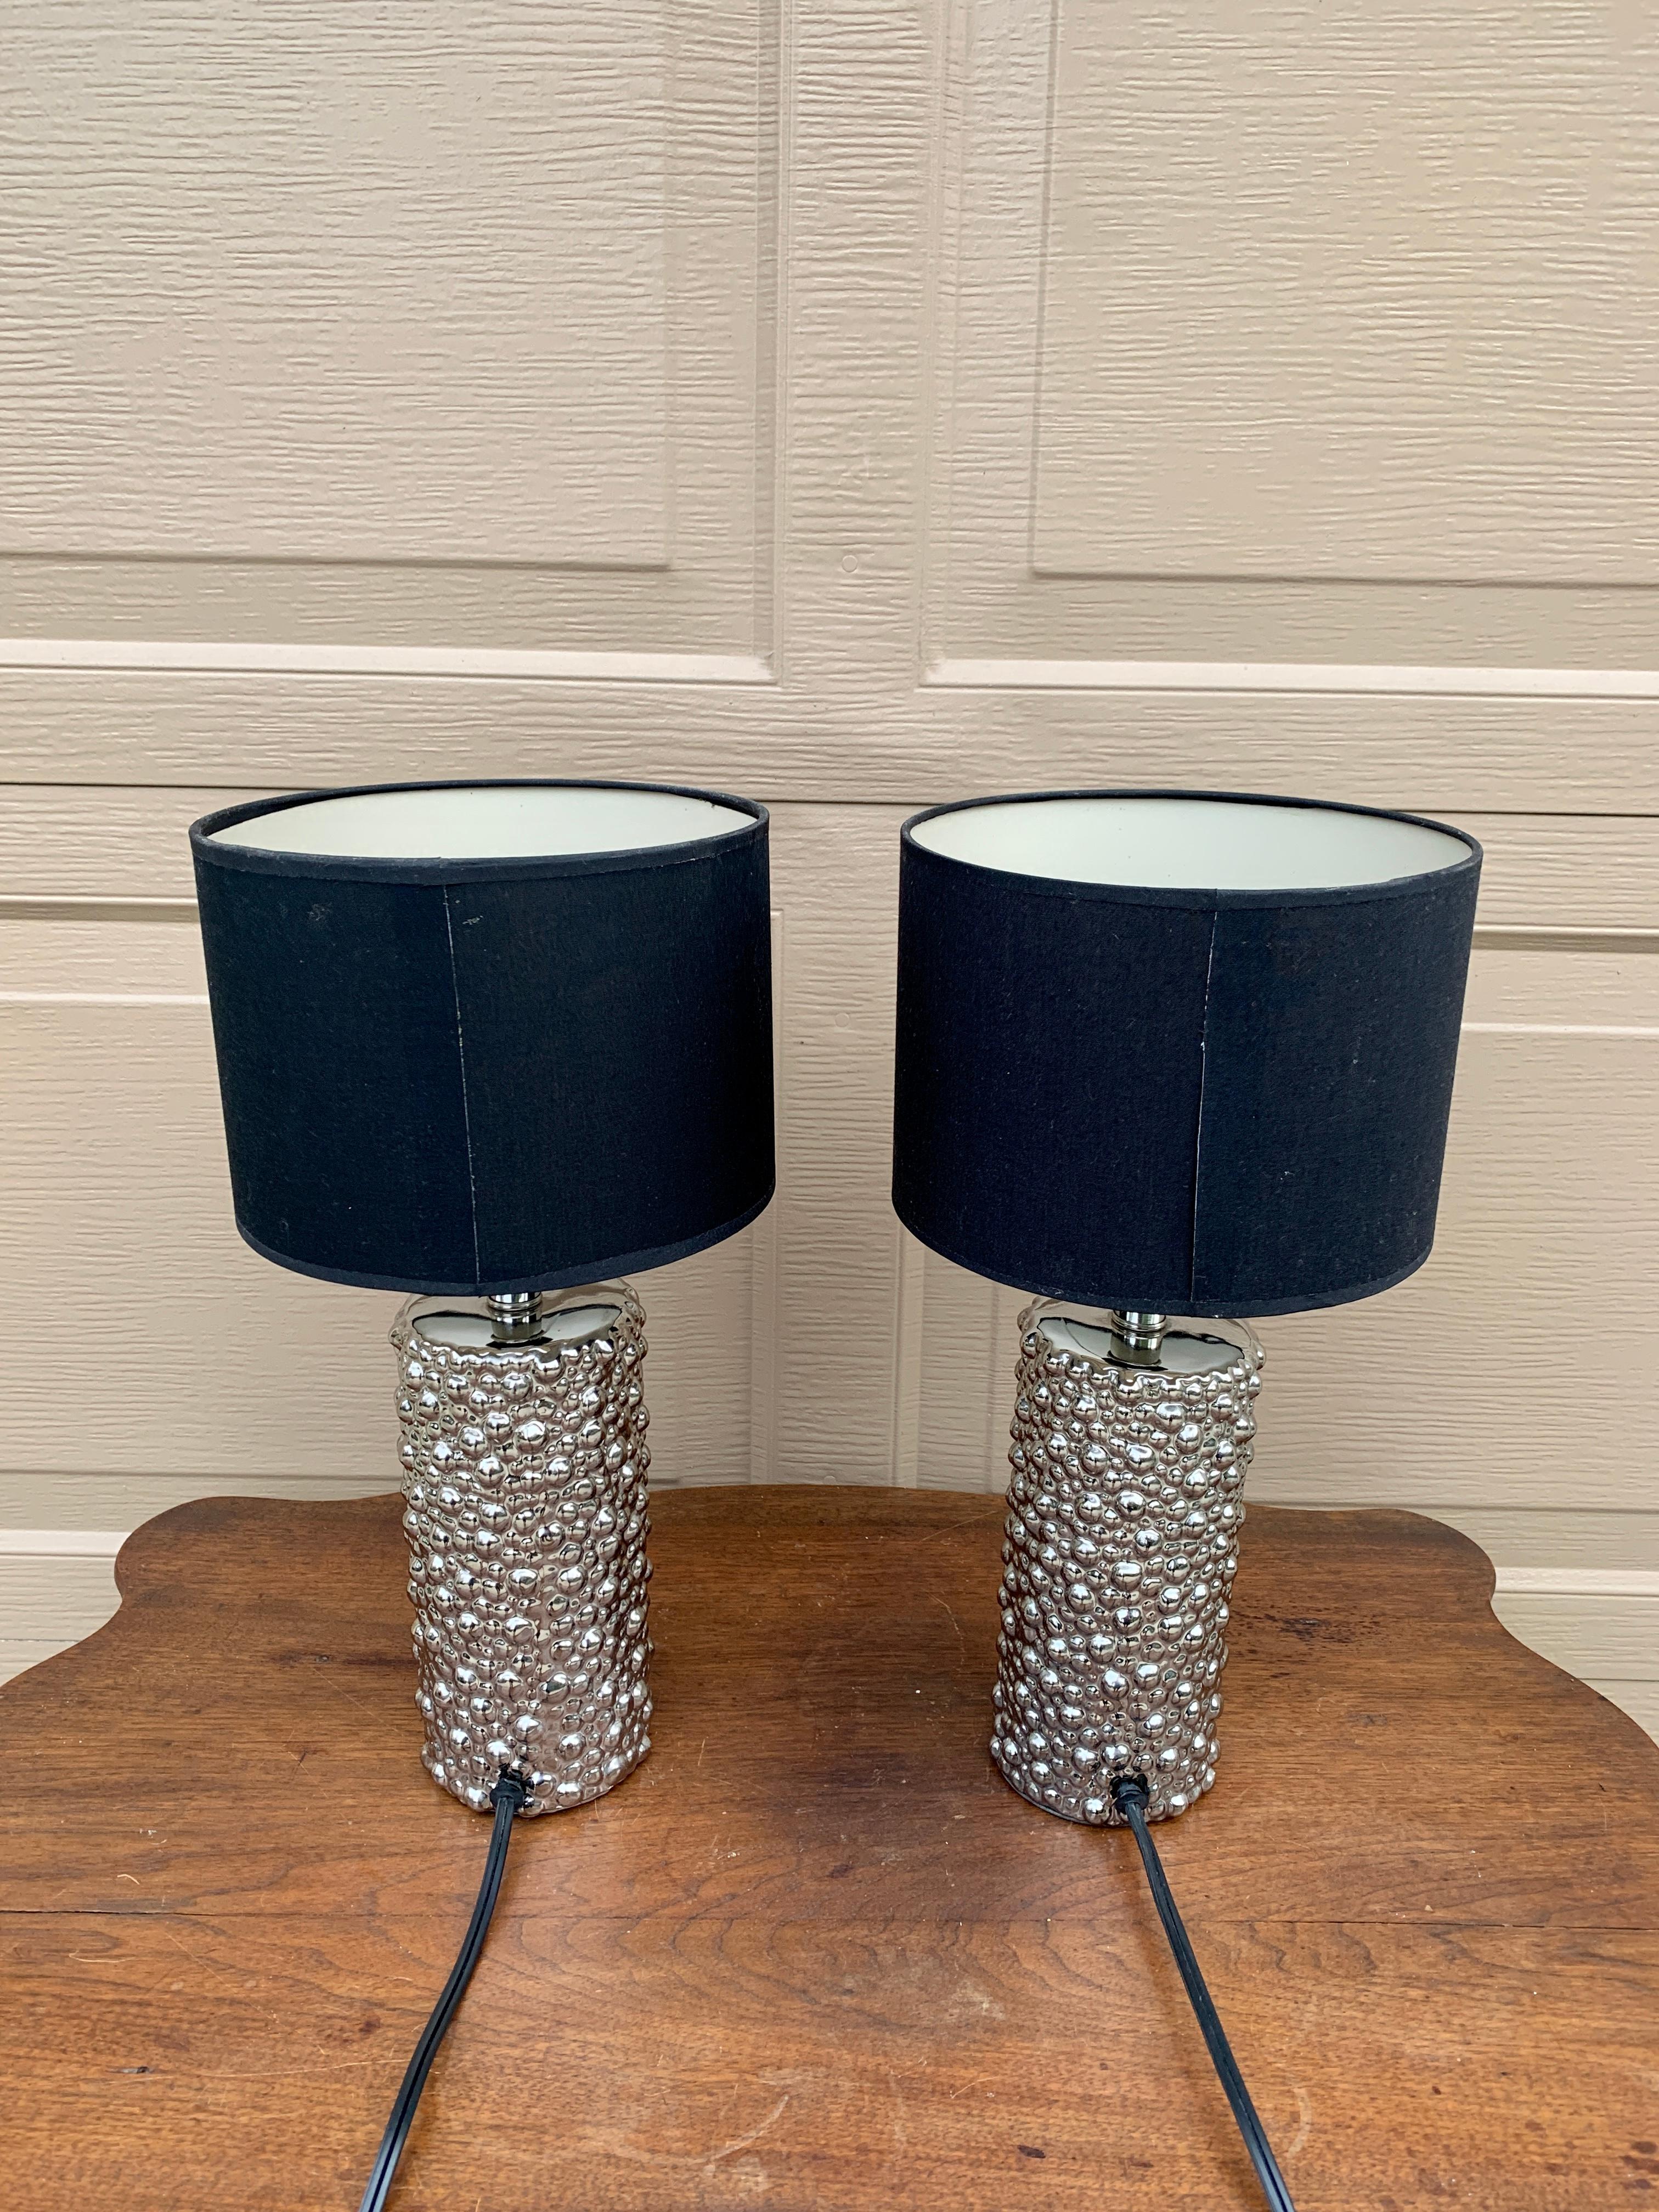 20th Century Contemporary Chrome Table Lamps with Black Drum Shades, Pair For Sale